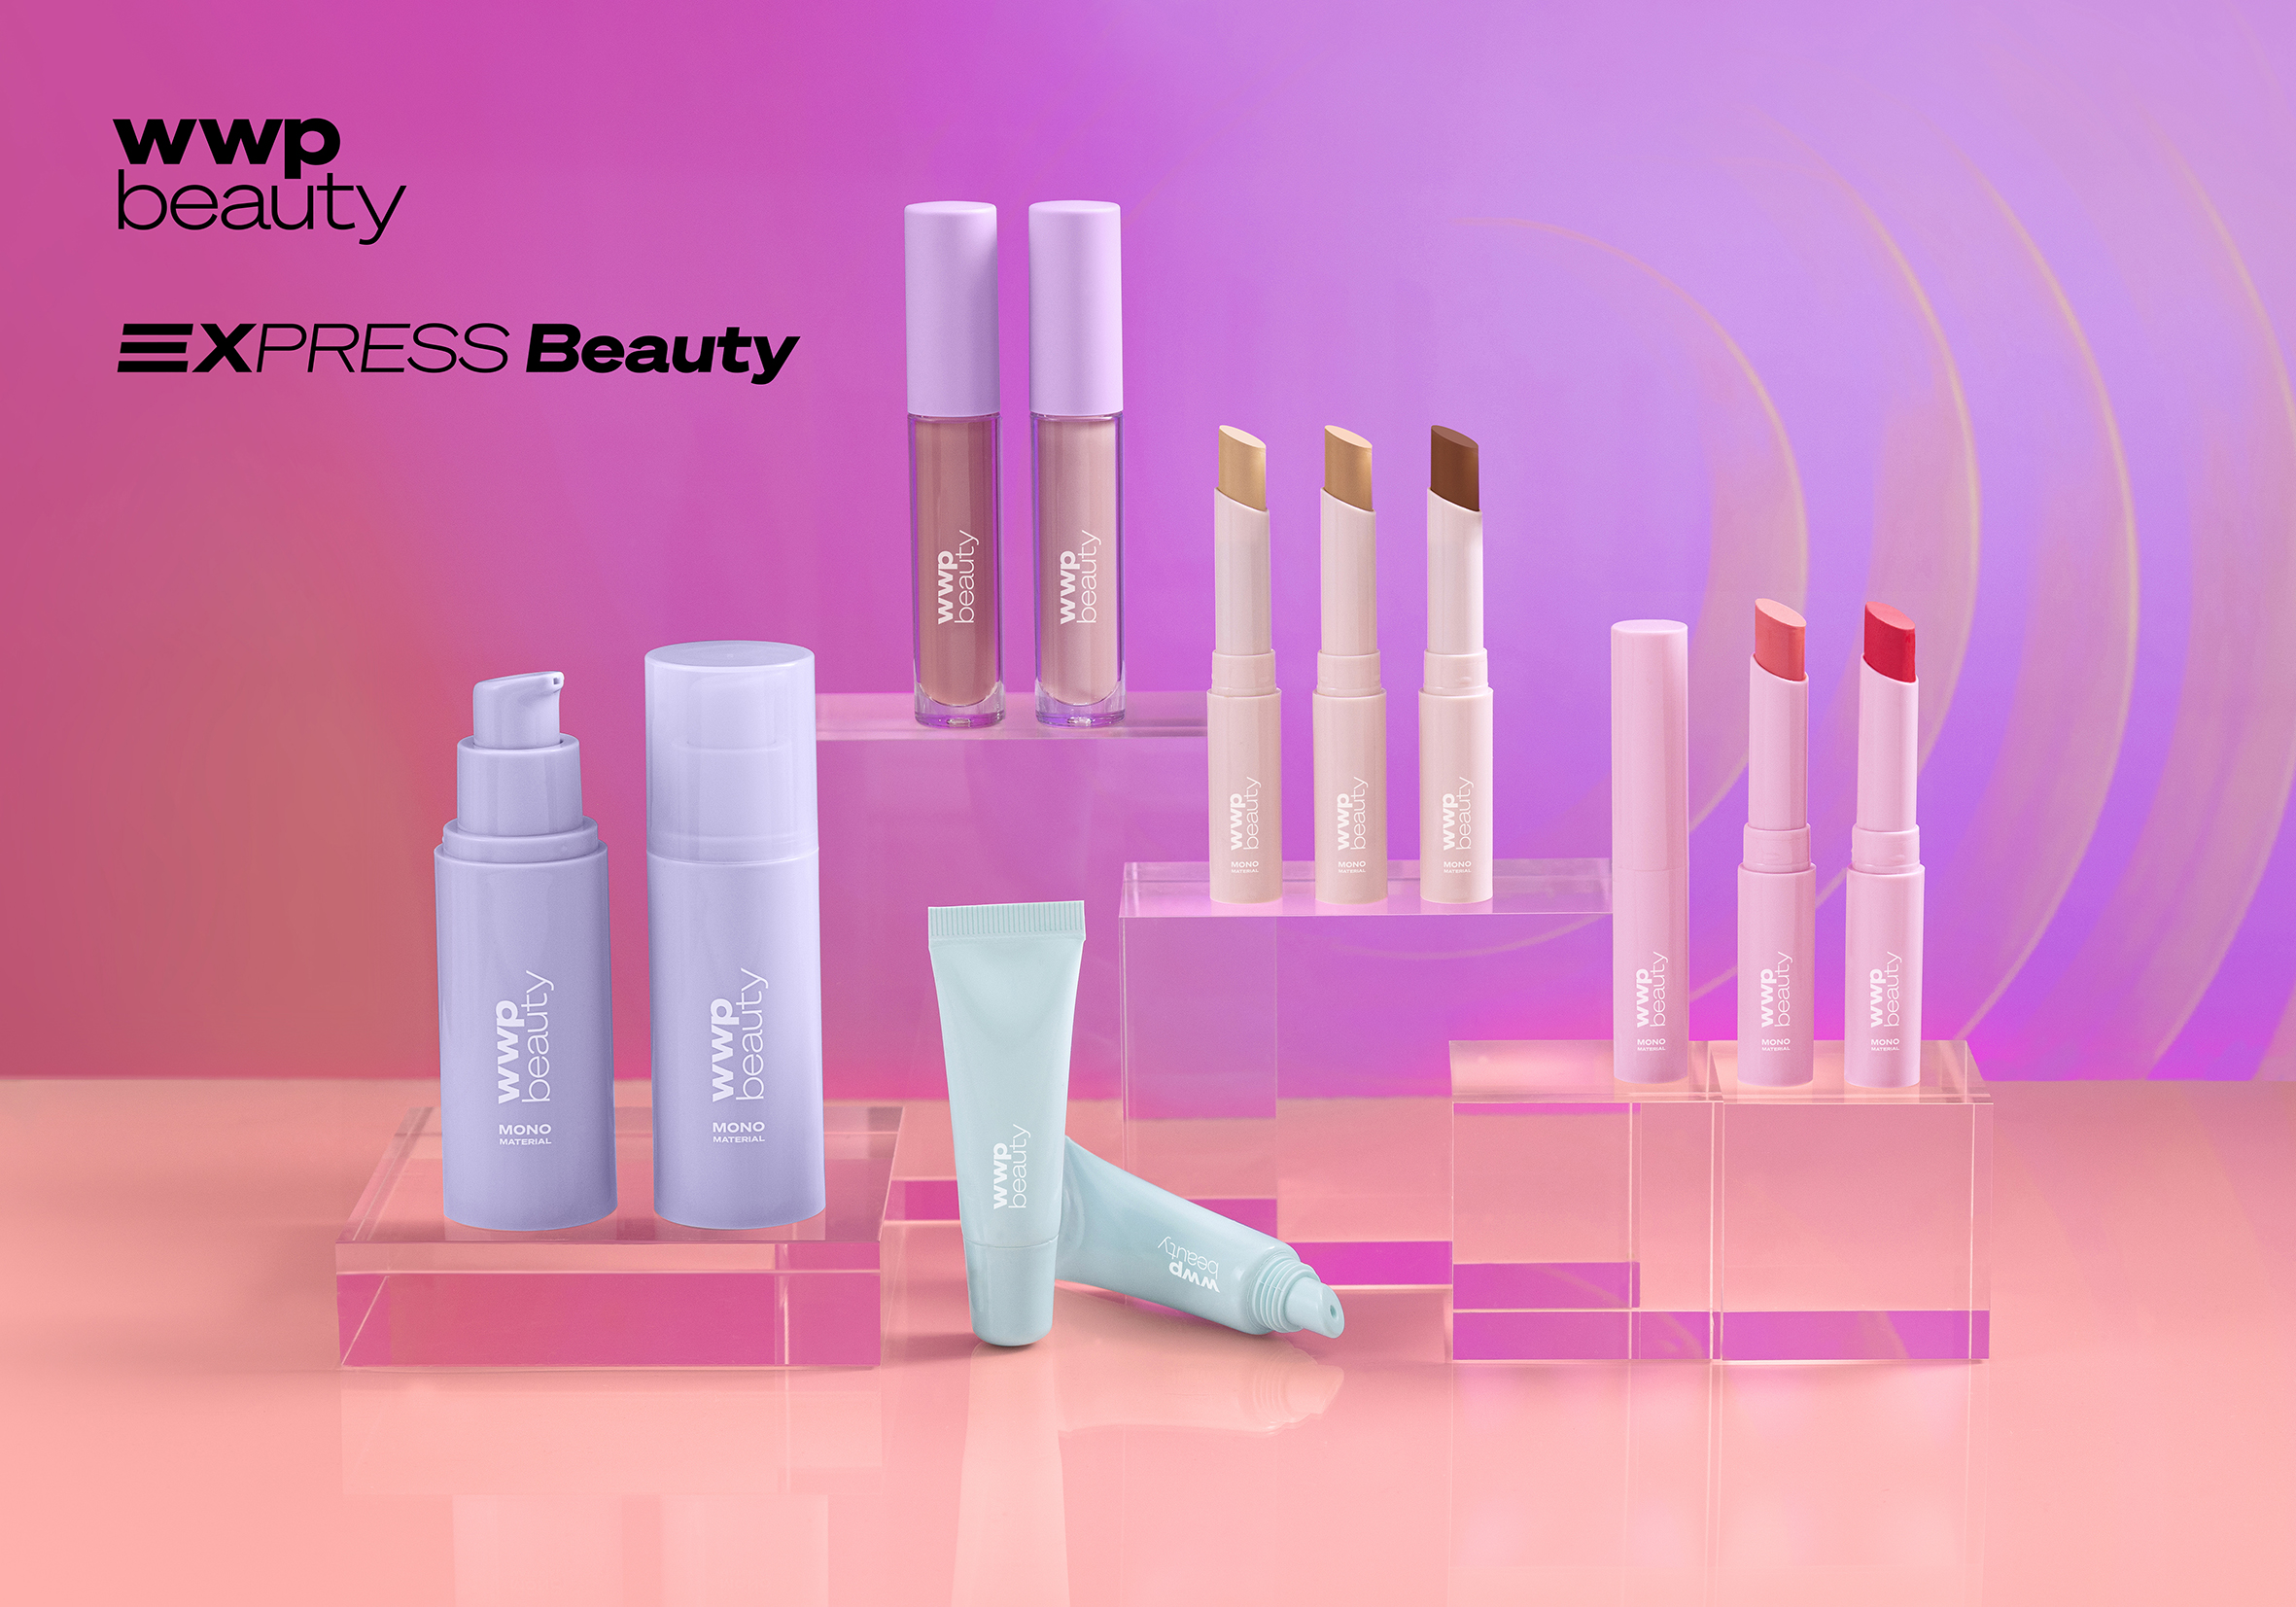 WWP Beauty unveils new sustainable packaging and turnkey